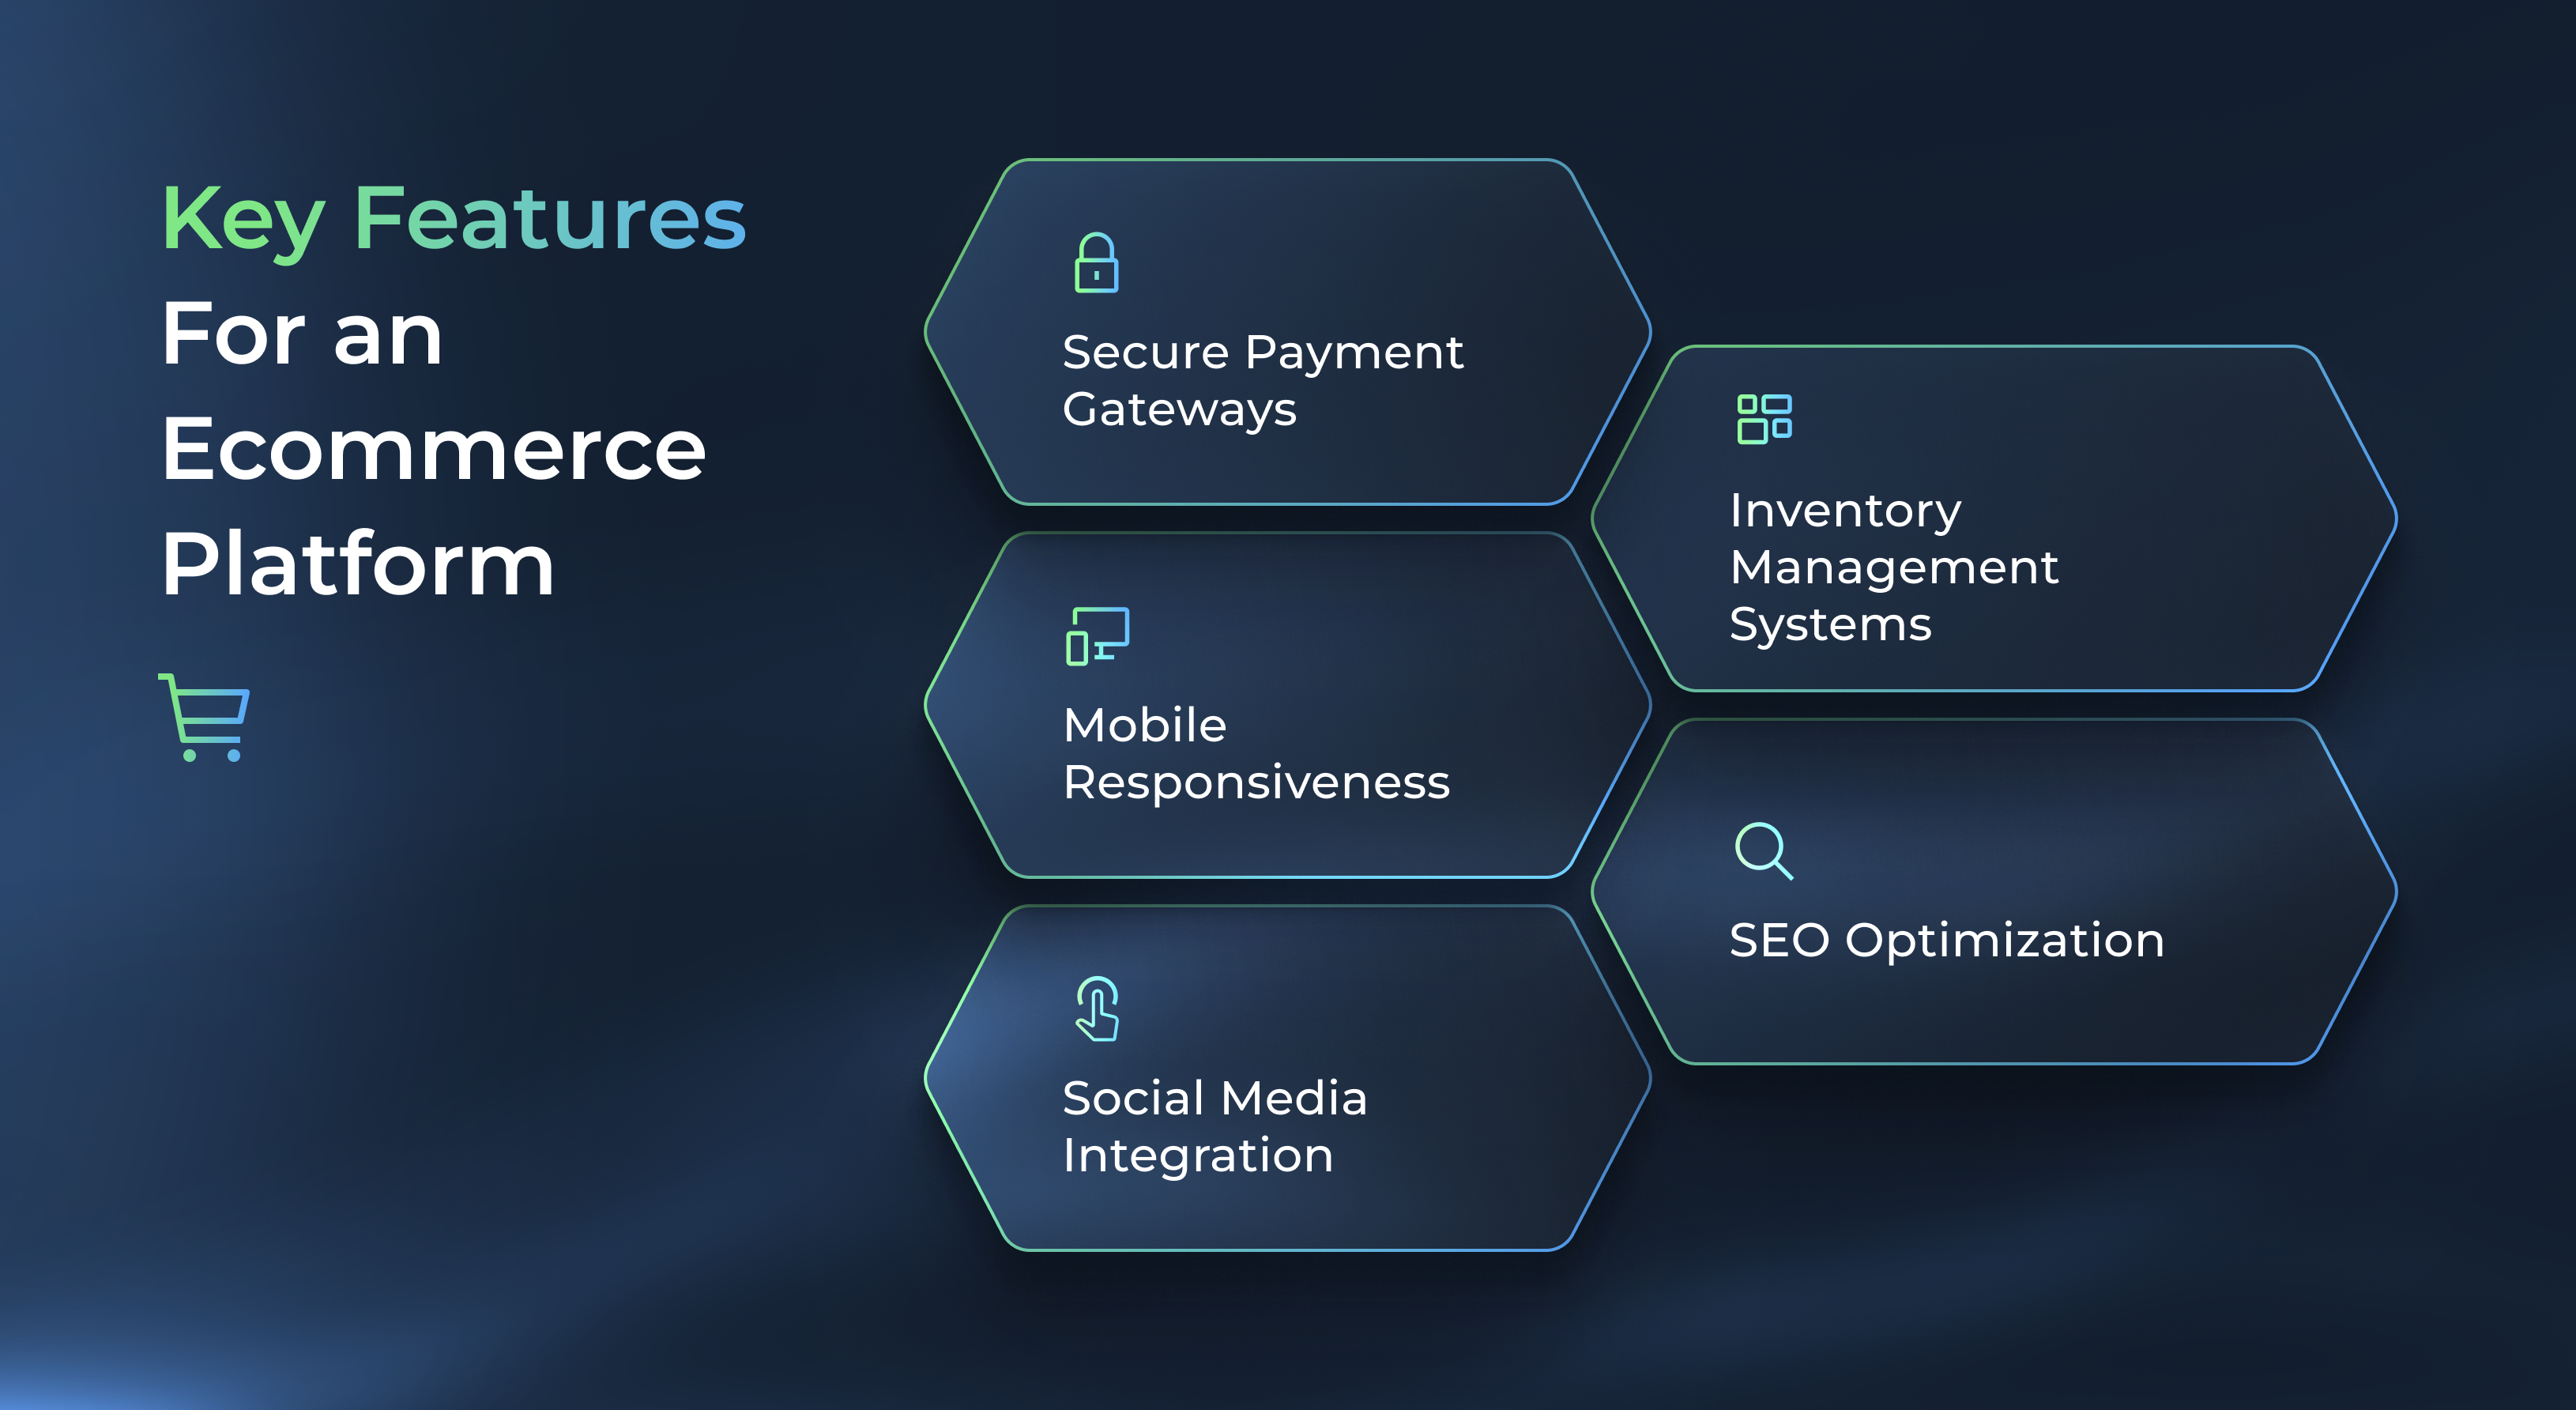 Key Features For an Ecommerce Platform
Secure Payment Gateways
Inventory Management Systems
Mobile Responsiveness
SEO Optimization
Social Media Integration
